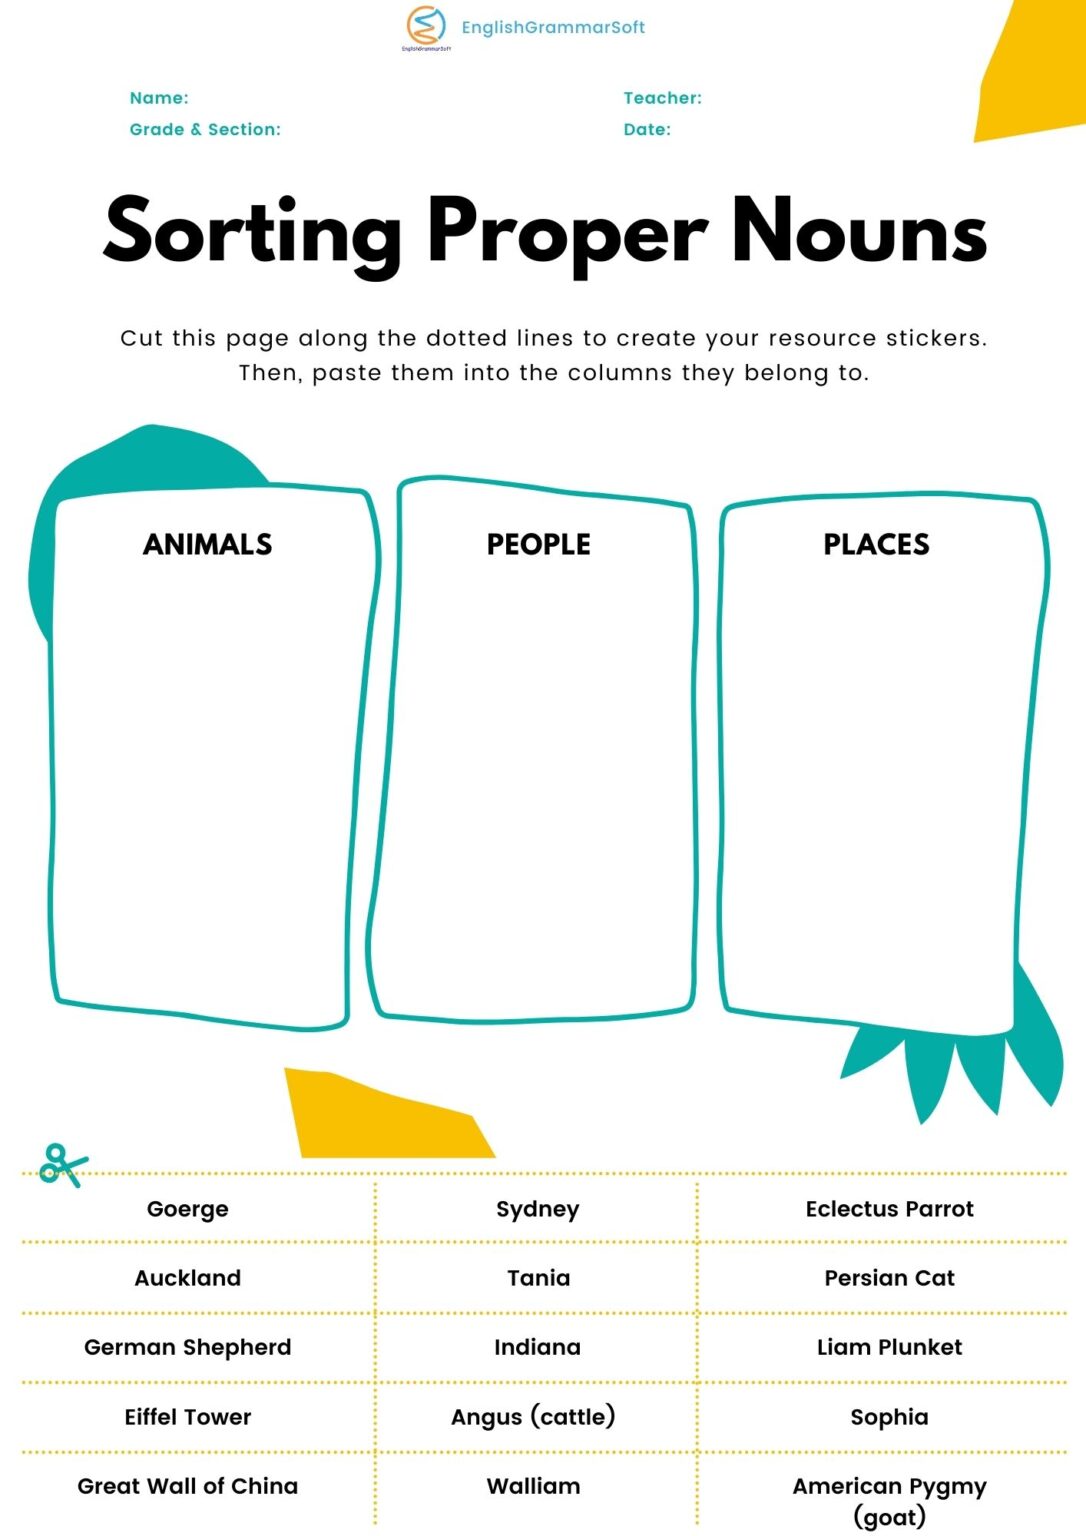 proper-noun-worksheets-with-answers-englishgrammarsoft